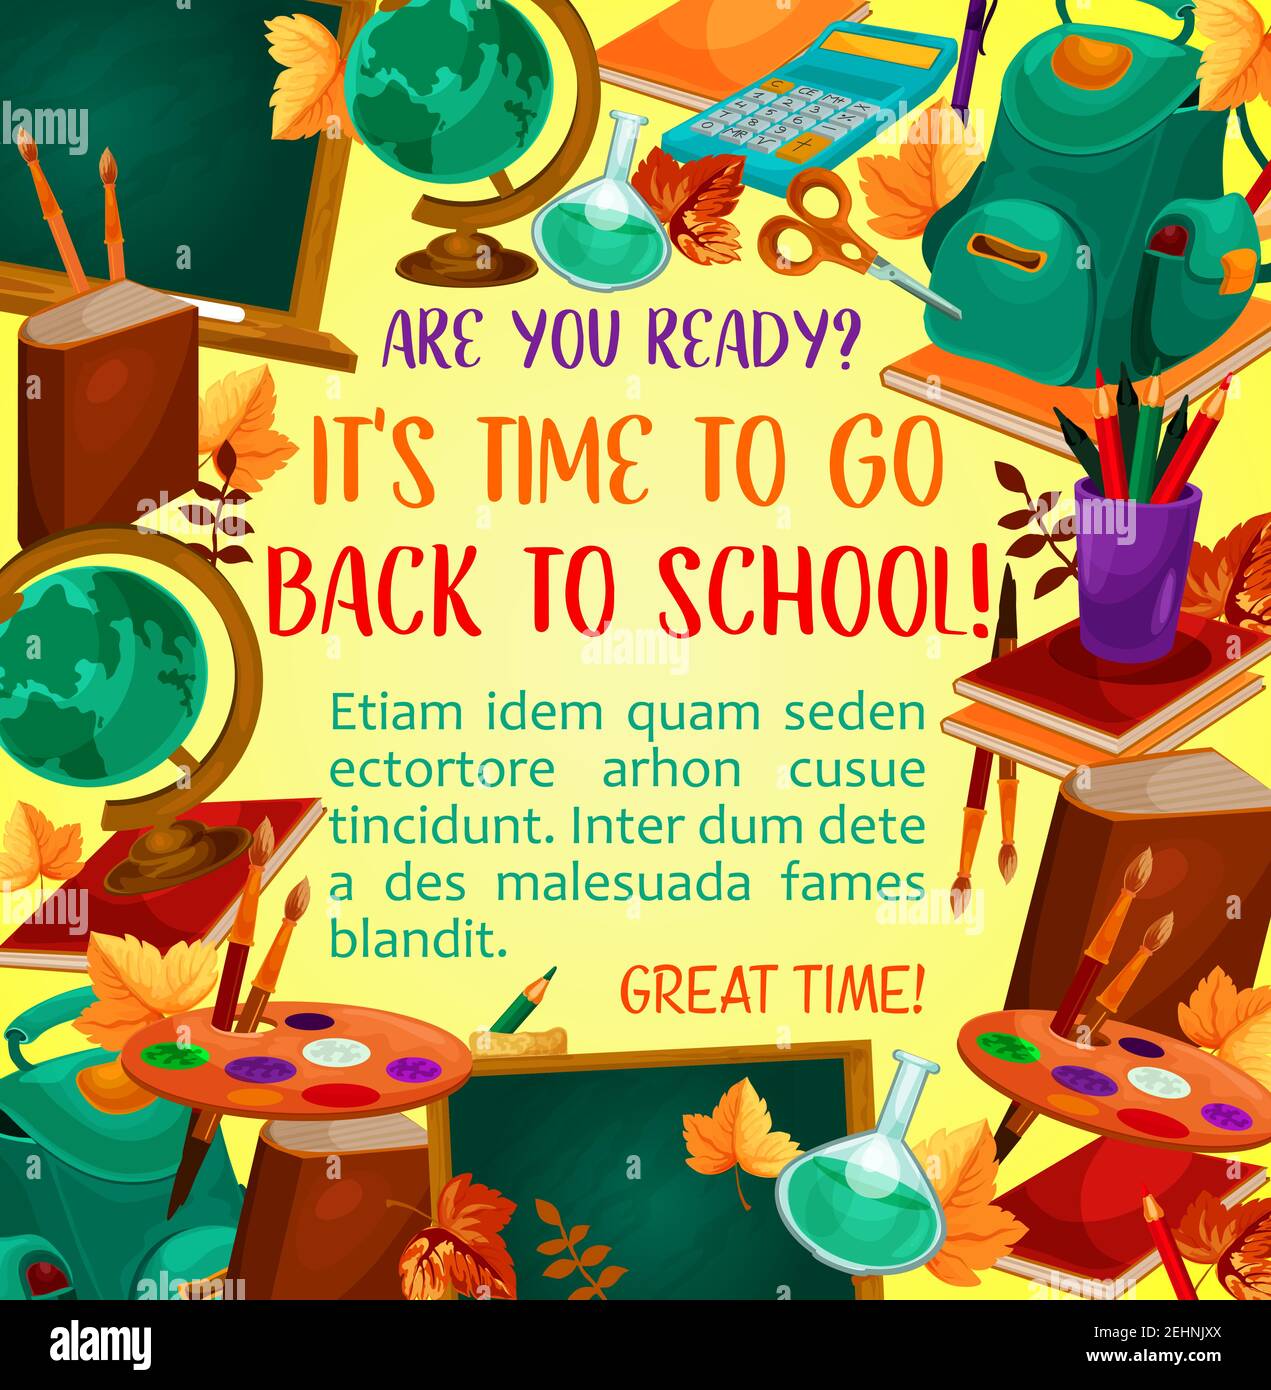 back to school poster with calculator and supplies in chalkboard